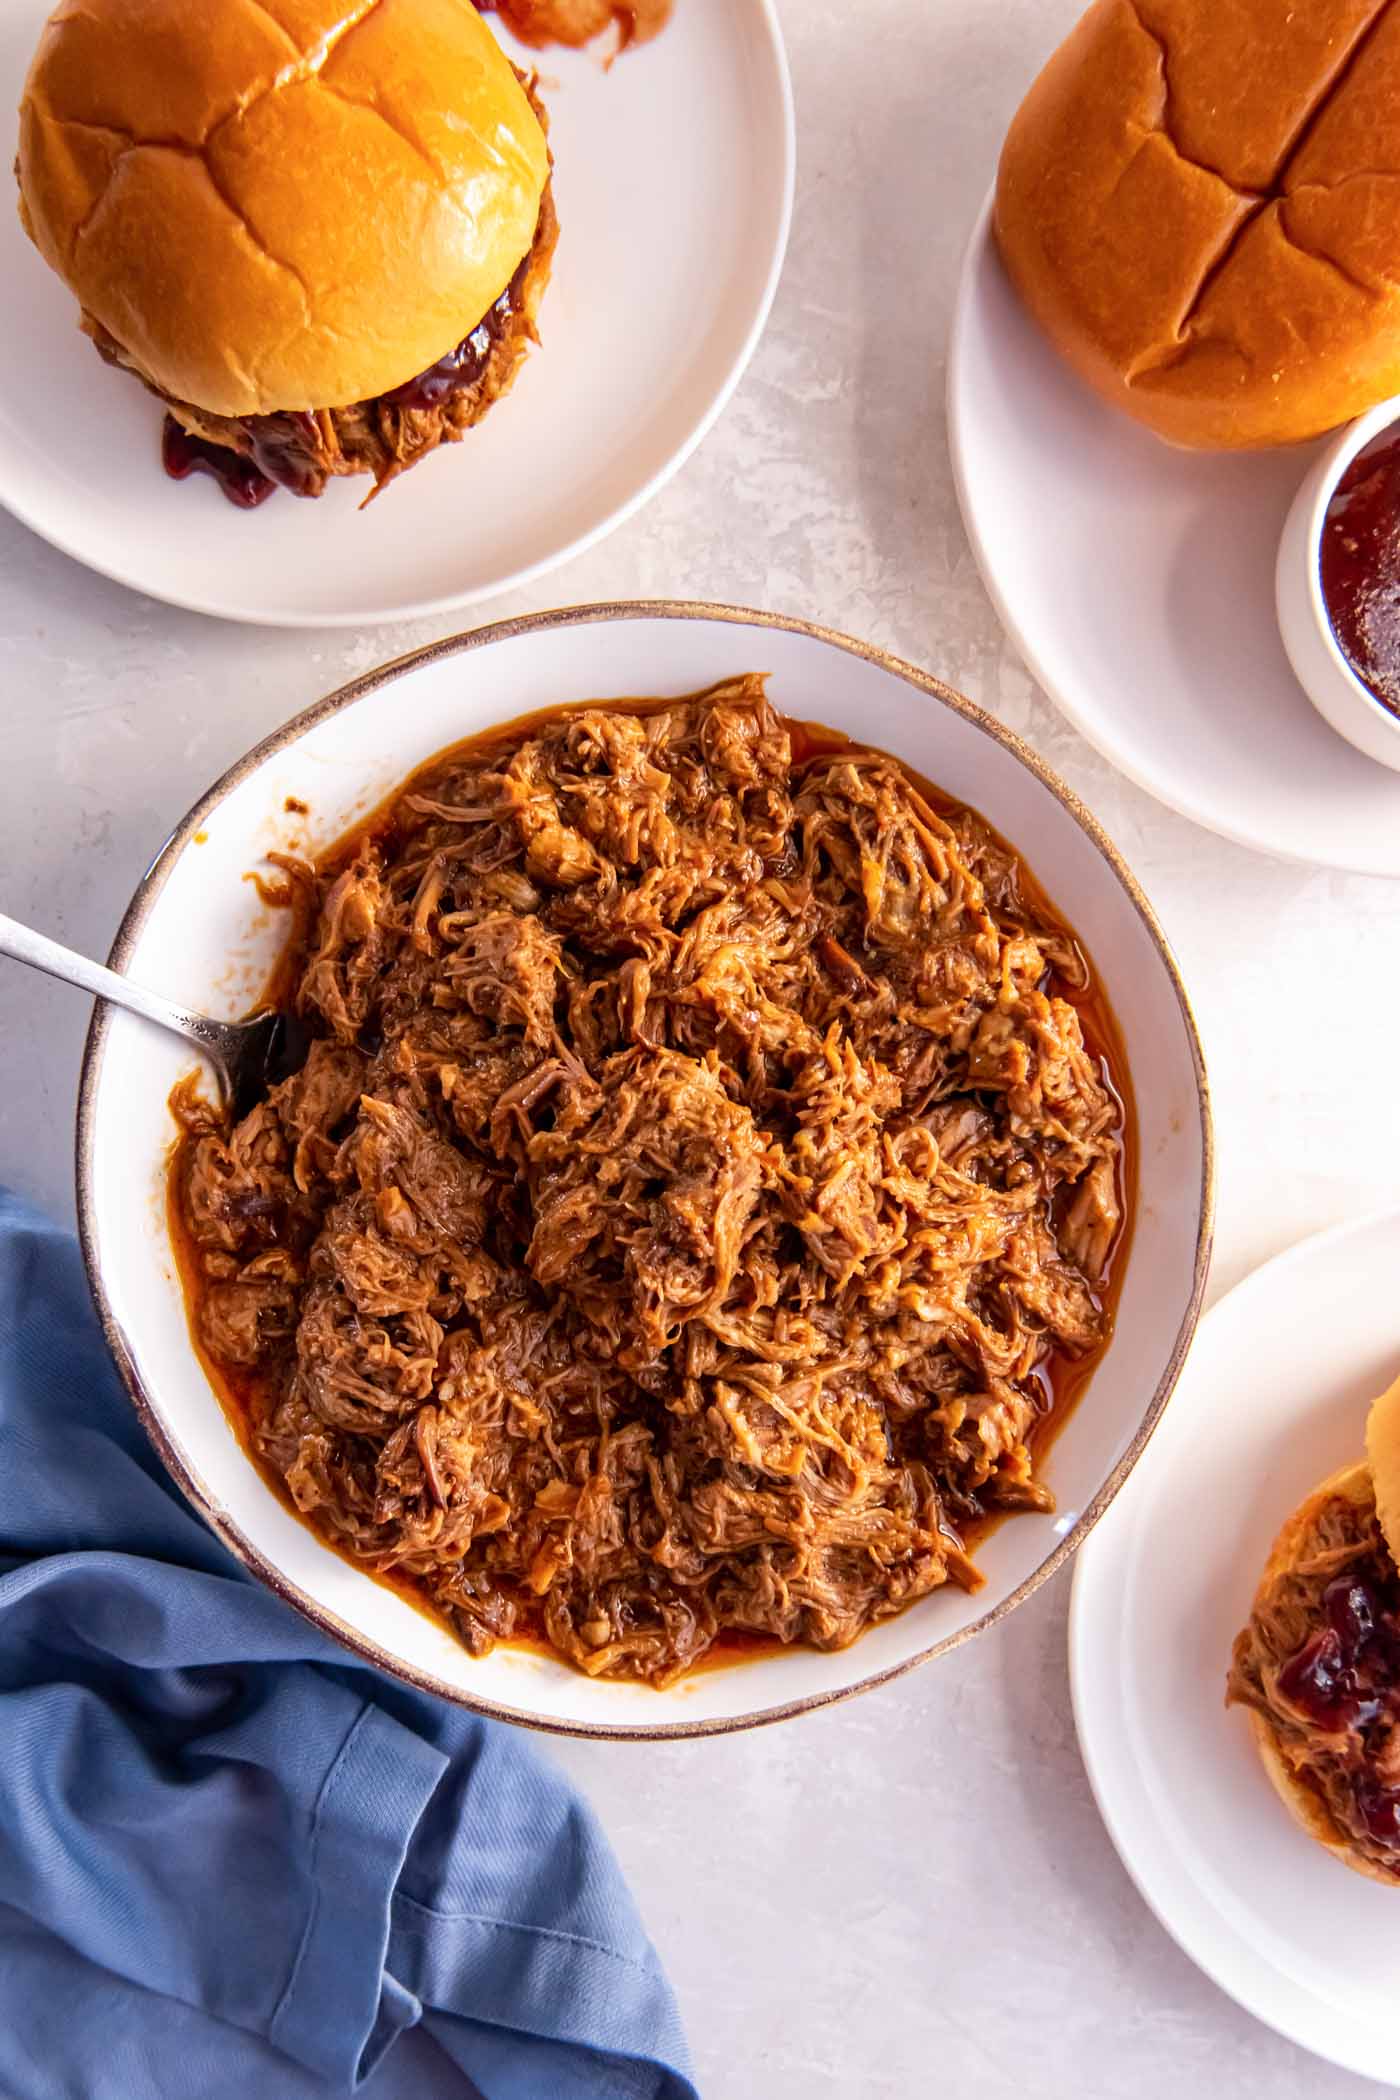 Pulled pork in a serving bowl with bbq pulled pork sandwiches served on plates.